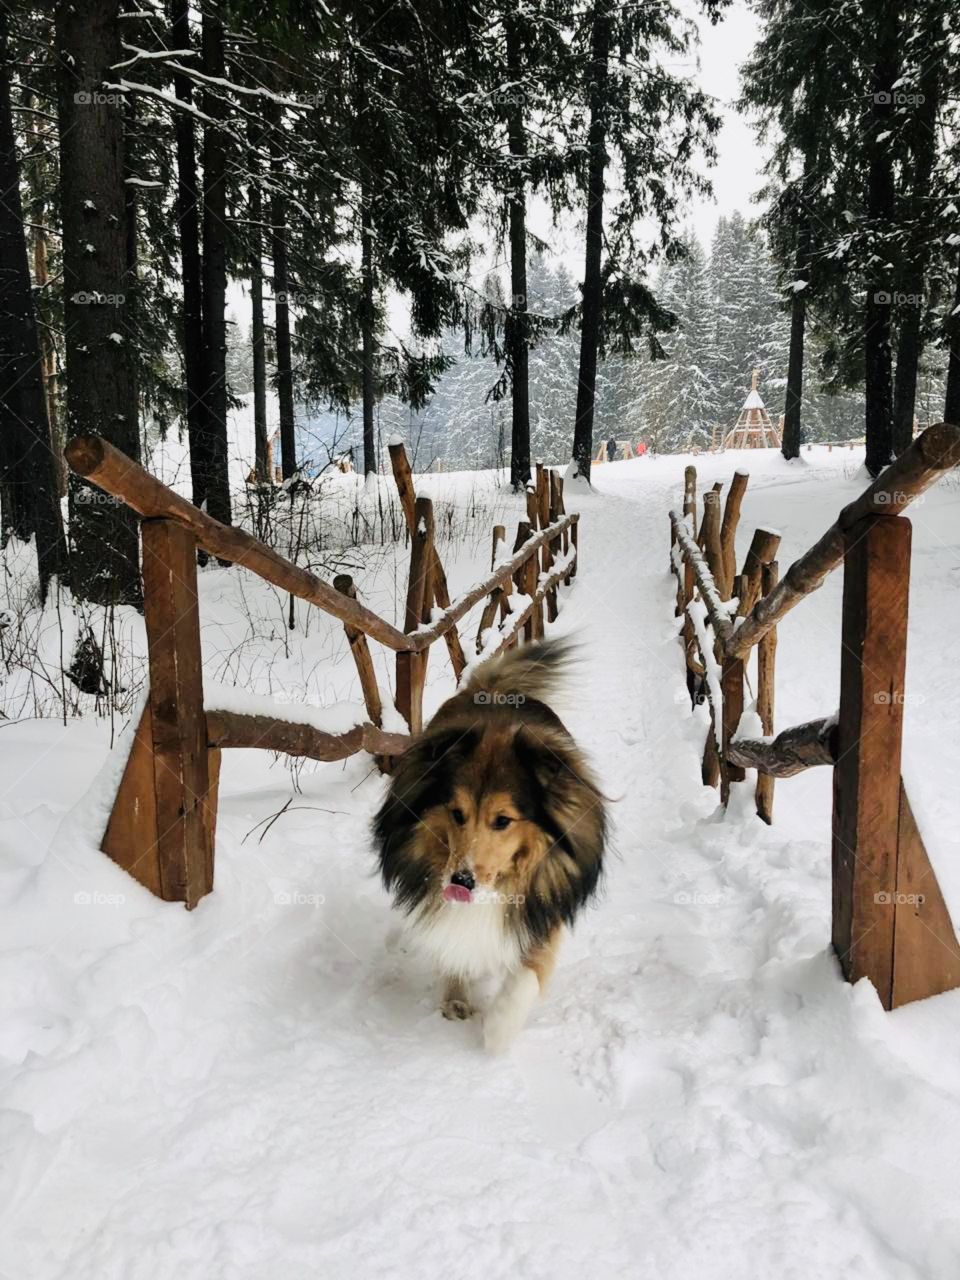 Dog walk in the winter forest